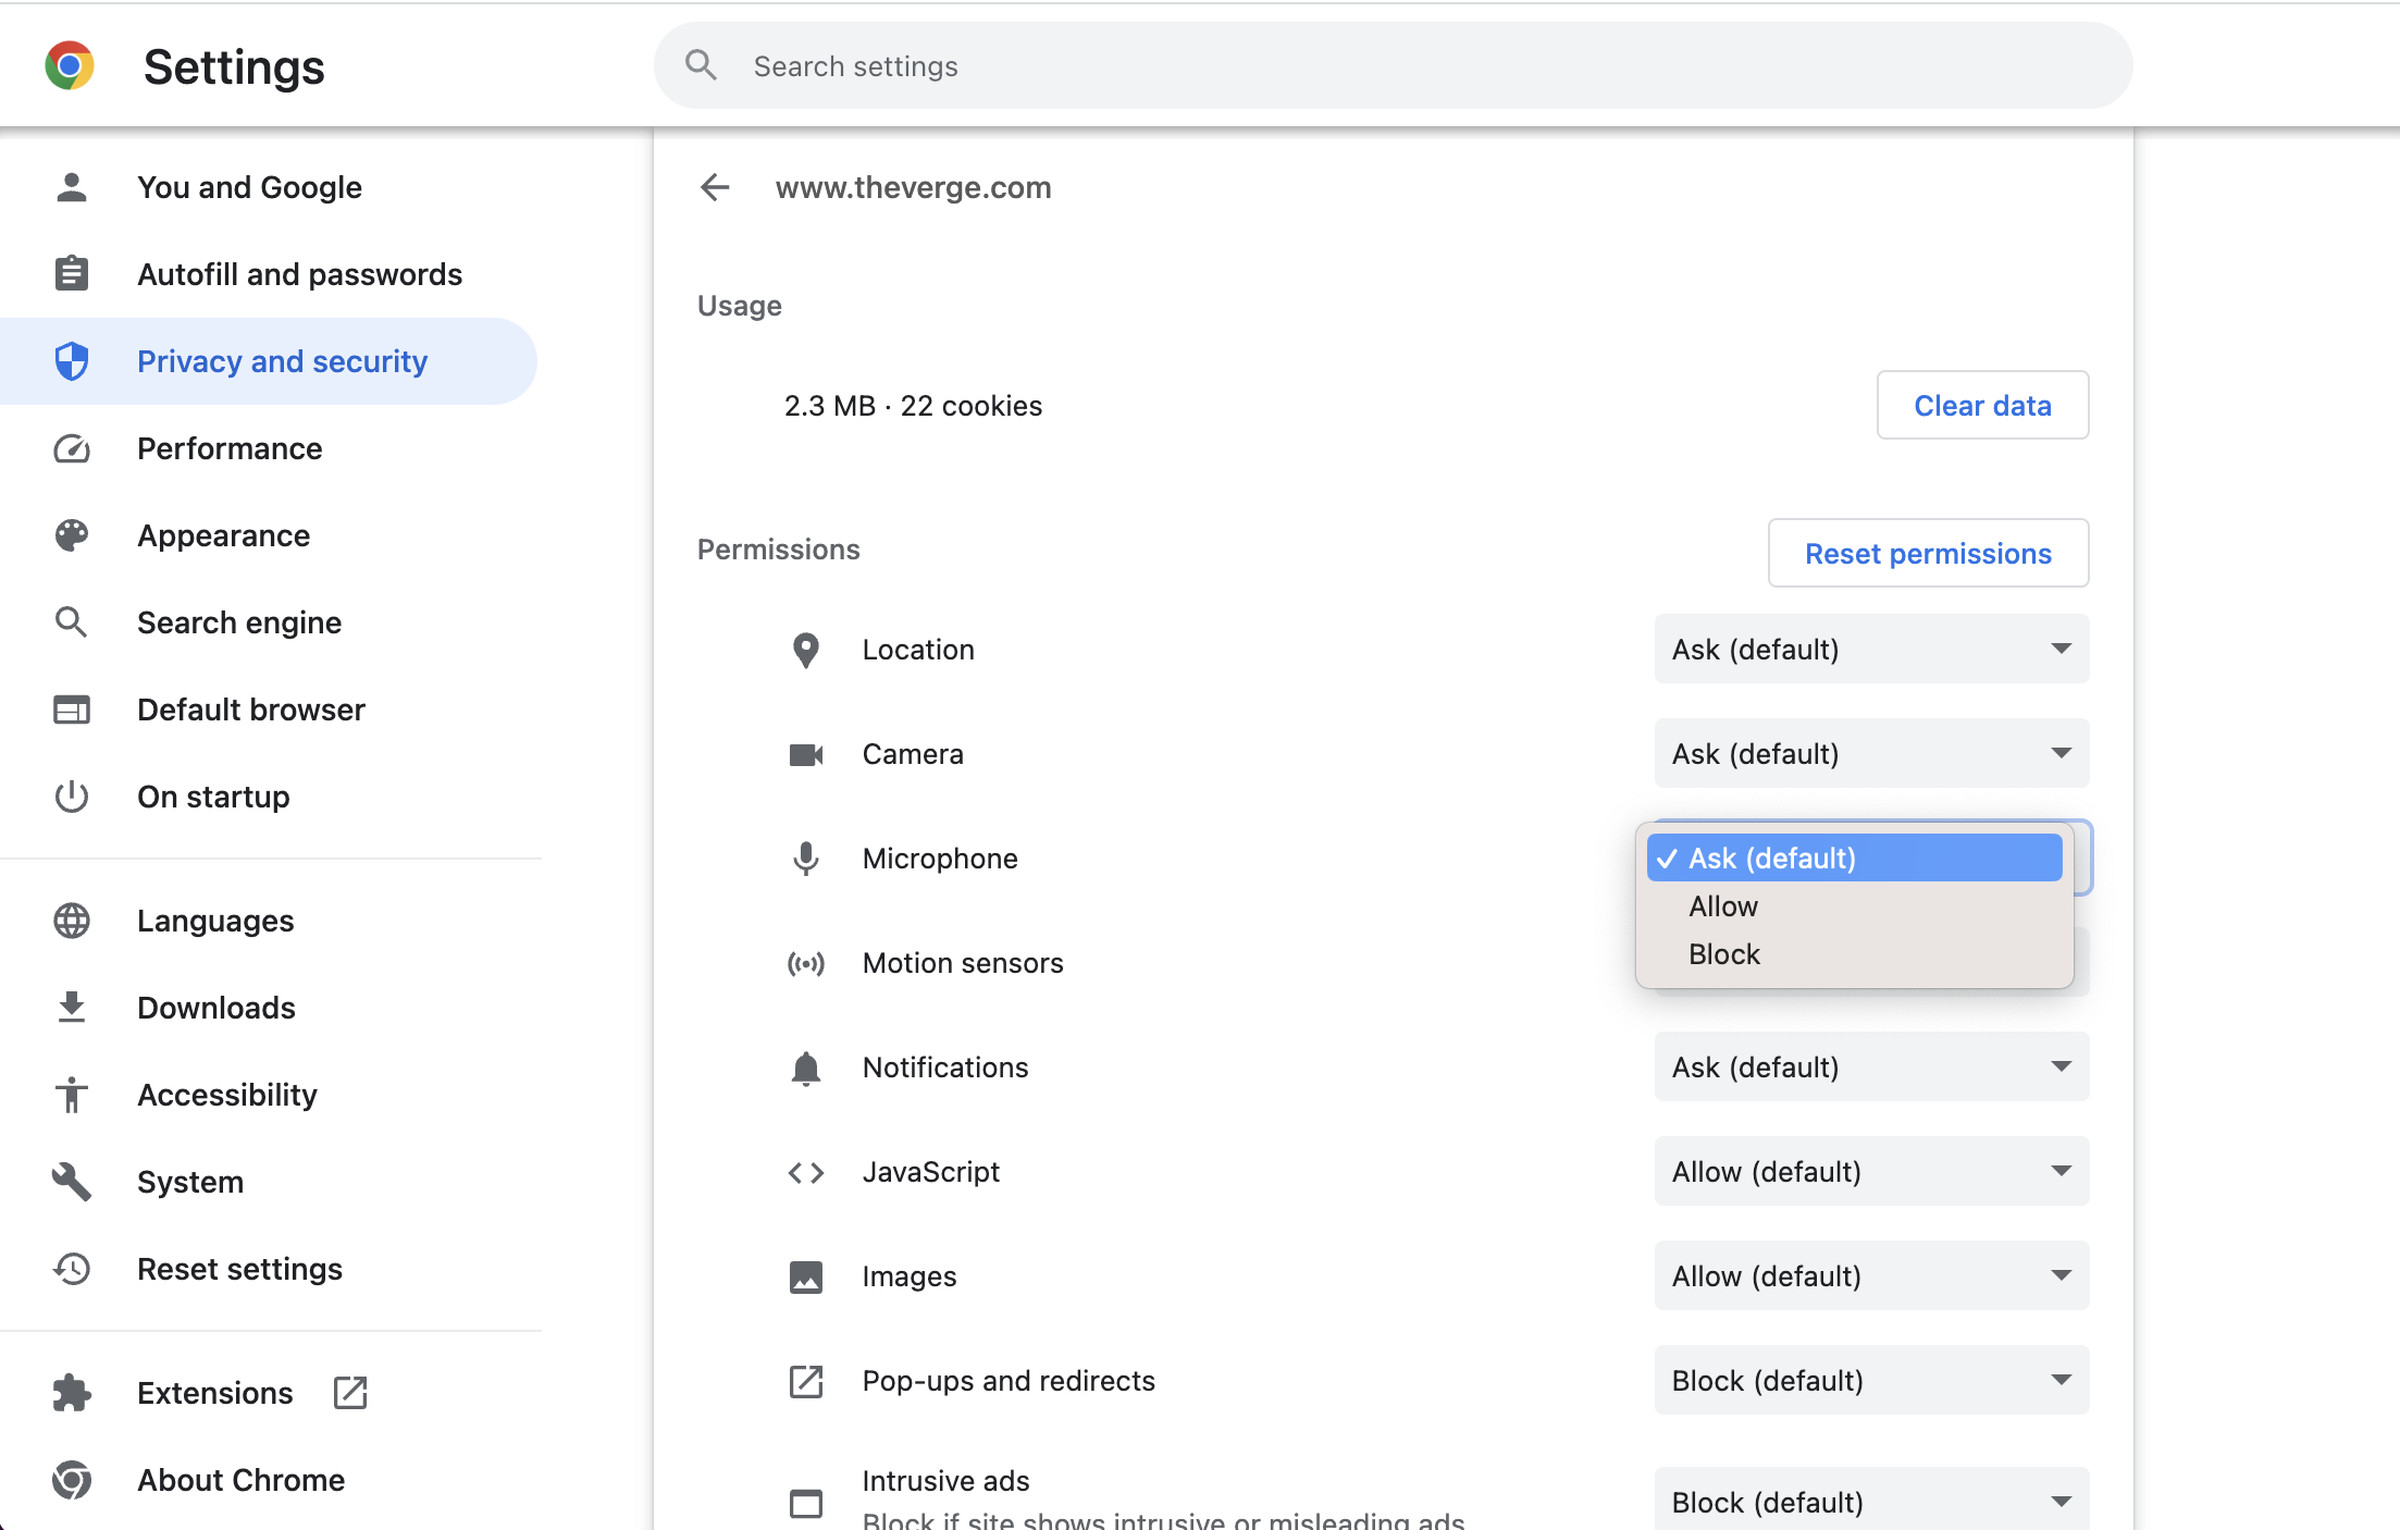 Settings page for Chrome with categories listed in left column, Privacy and security highlighted, and permissions listed in center with drop-down for Ask, Allow, and Block.